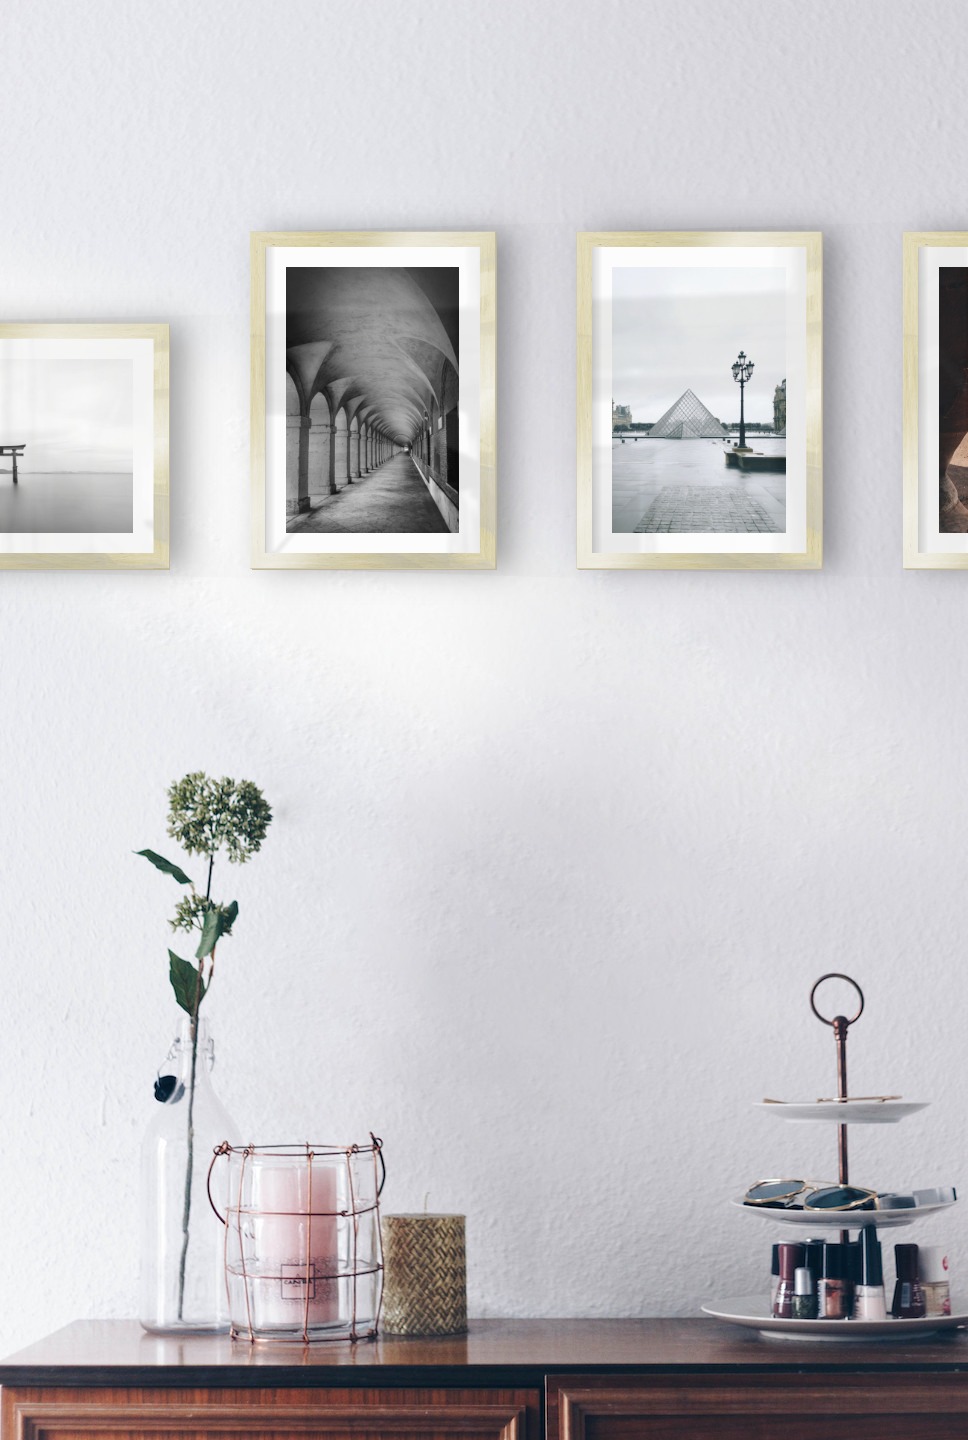 Gallery wall with picture frames in gold in sizes 21x30 with prints "Pillars in the water", "Hallway with pillars and arches", "Louvre in Paris" and "Petra in Jordan"